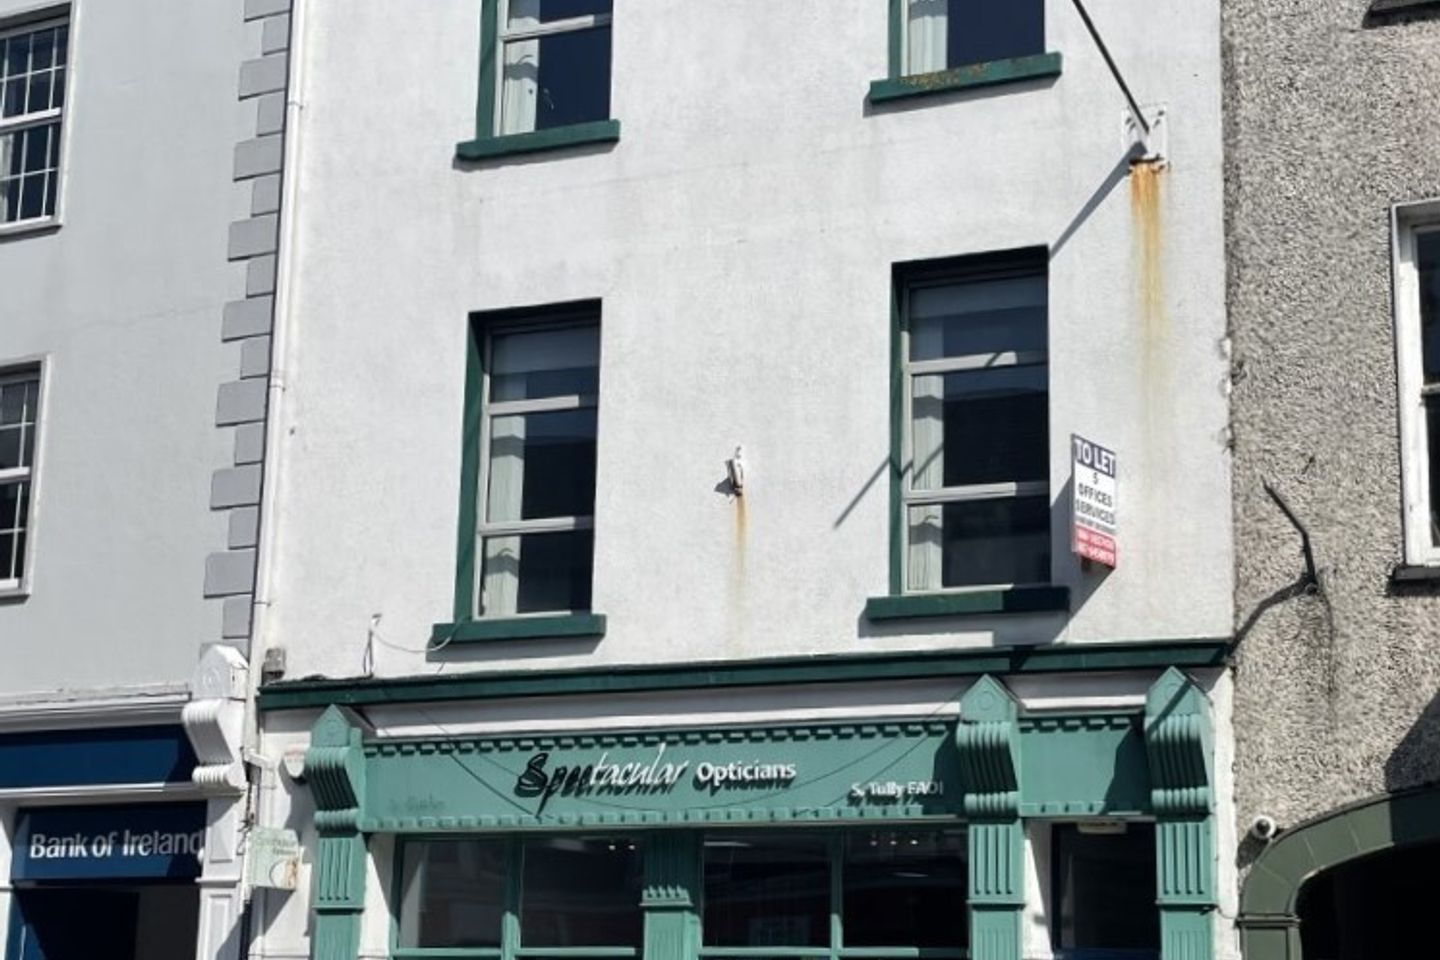 First Floor Offices, 58 Main Street, Loughrea, Co. Galway